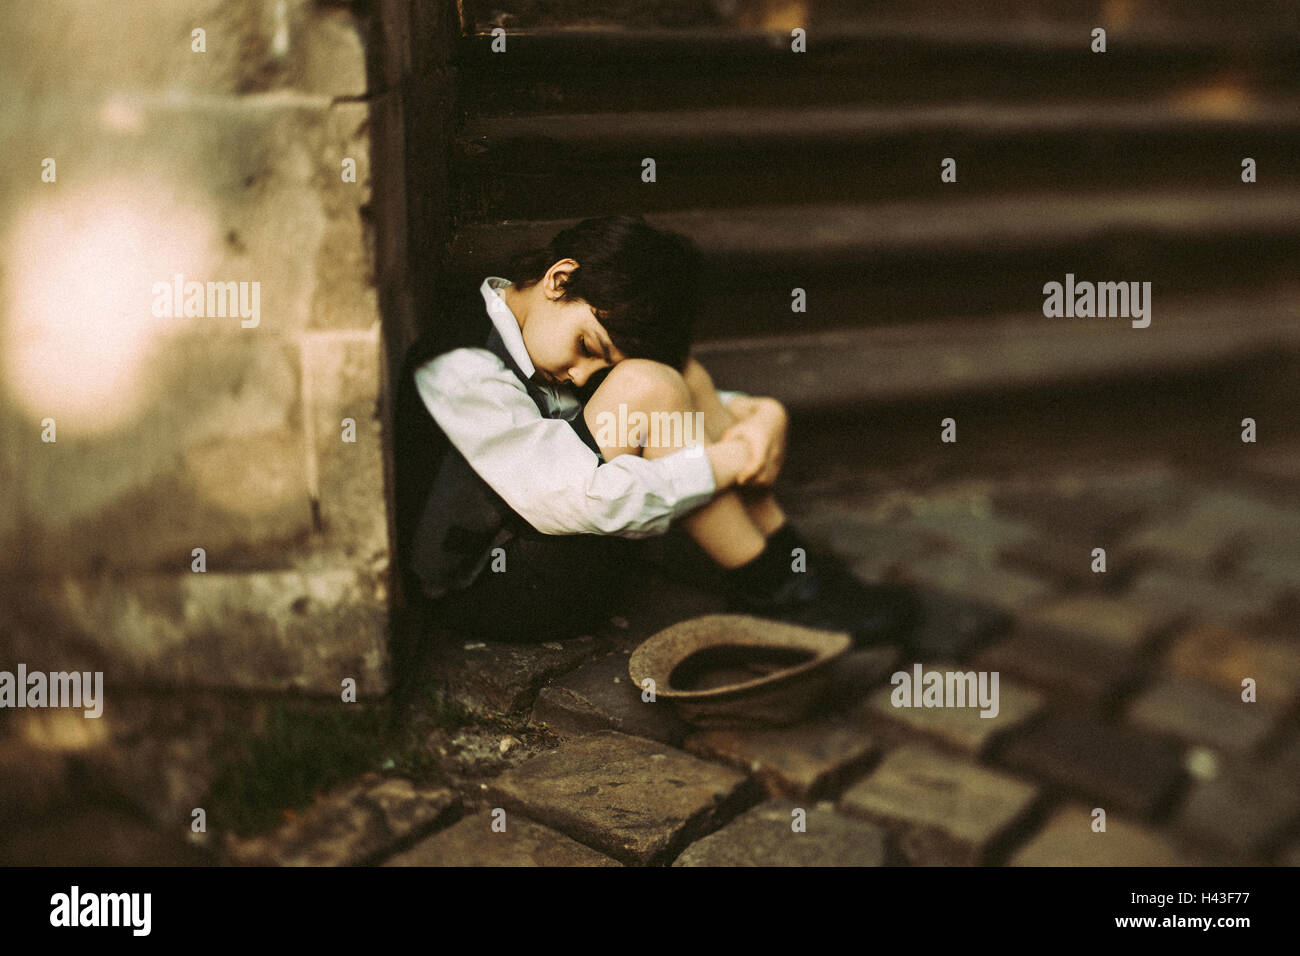 Old-fashioned Young boy sitting near staircase begging for money Banque D'Images